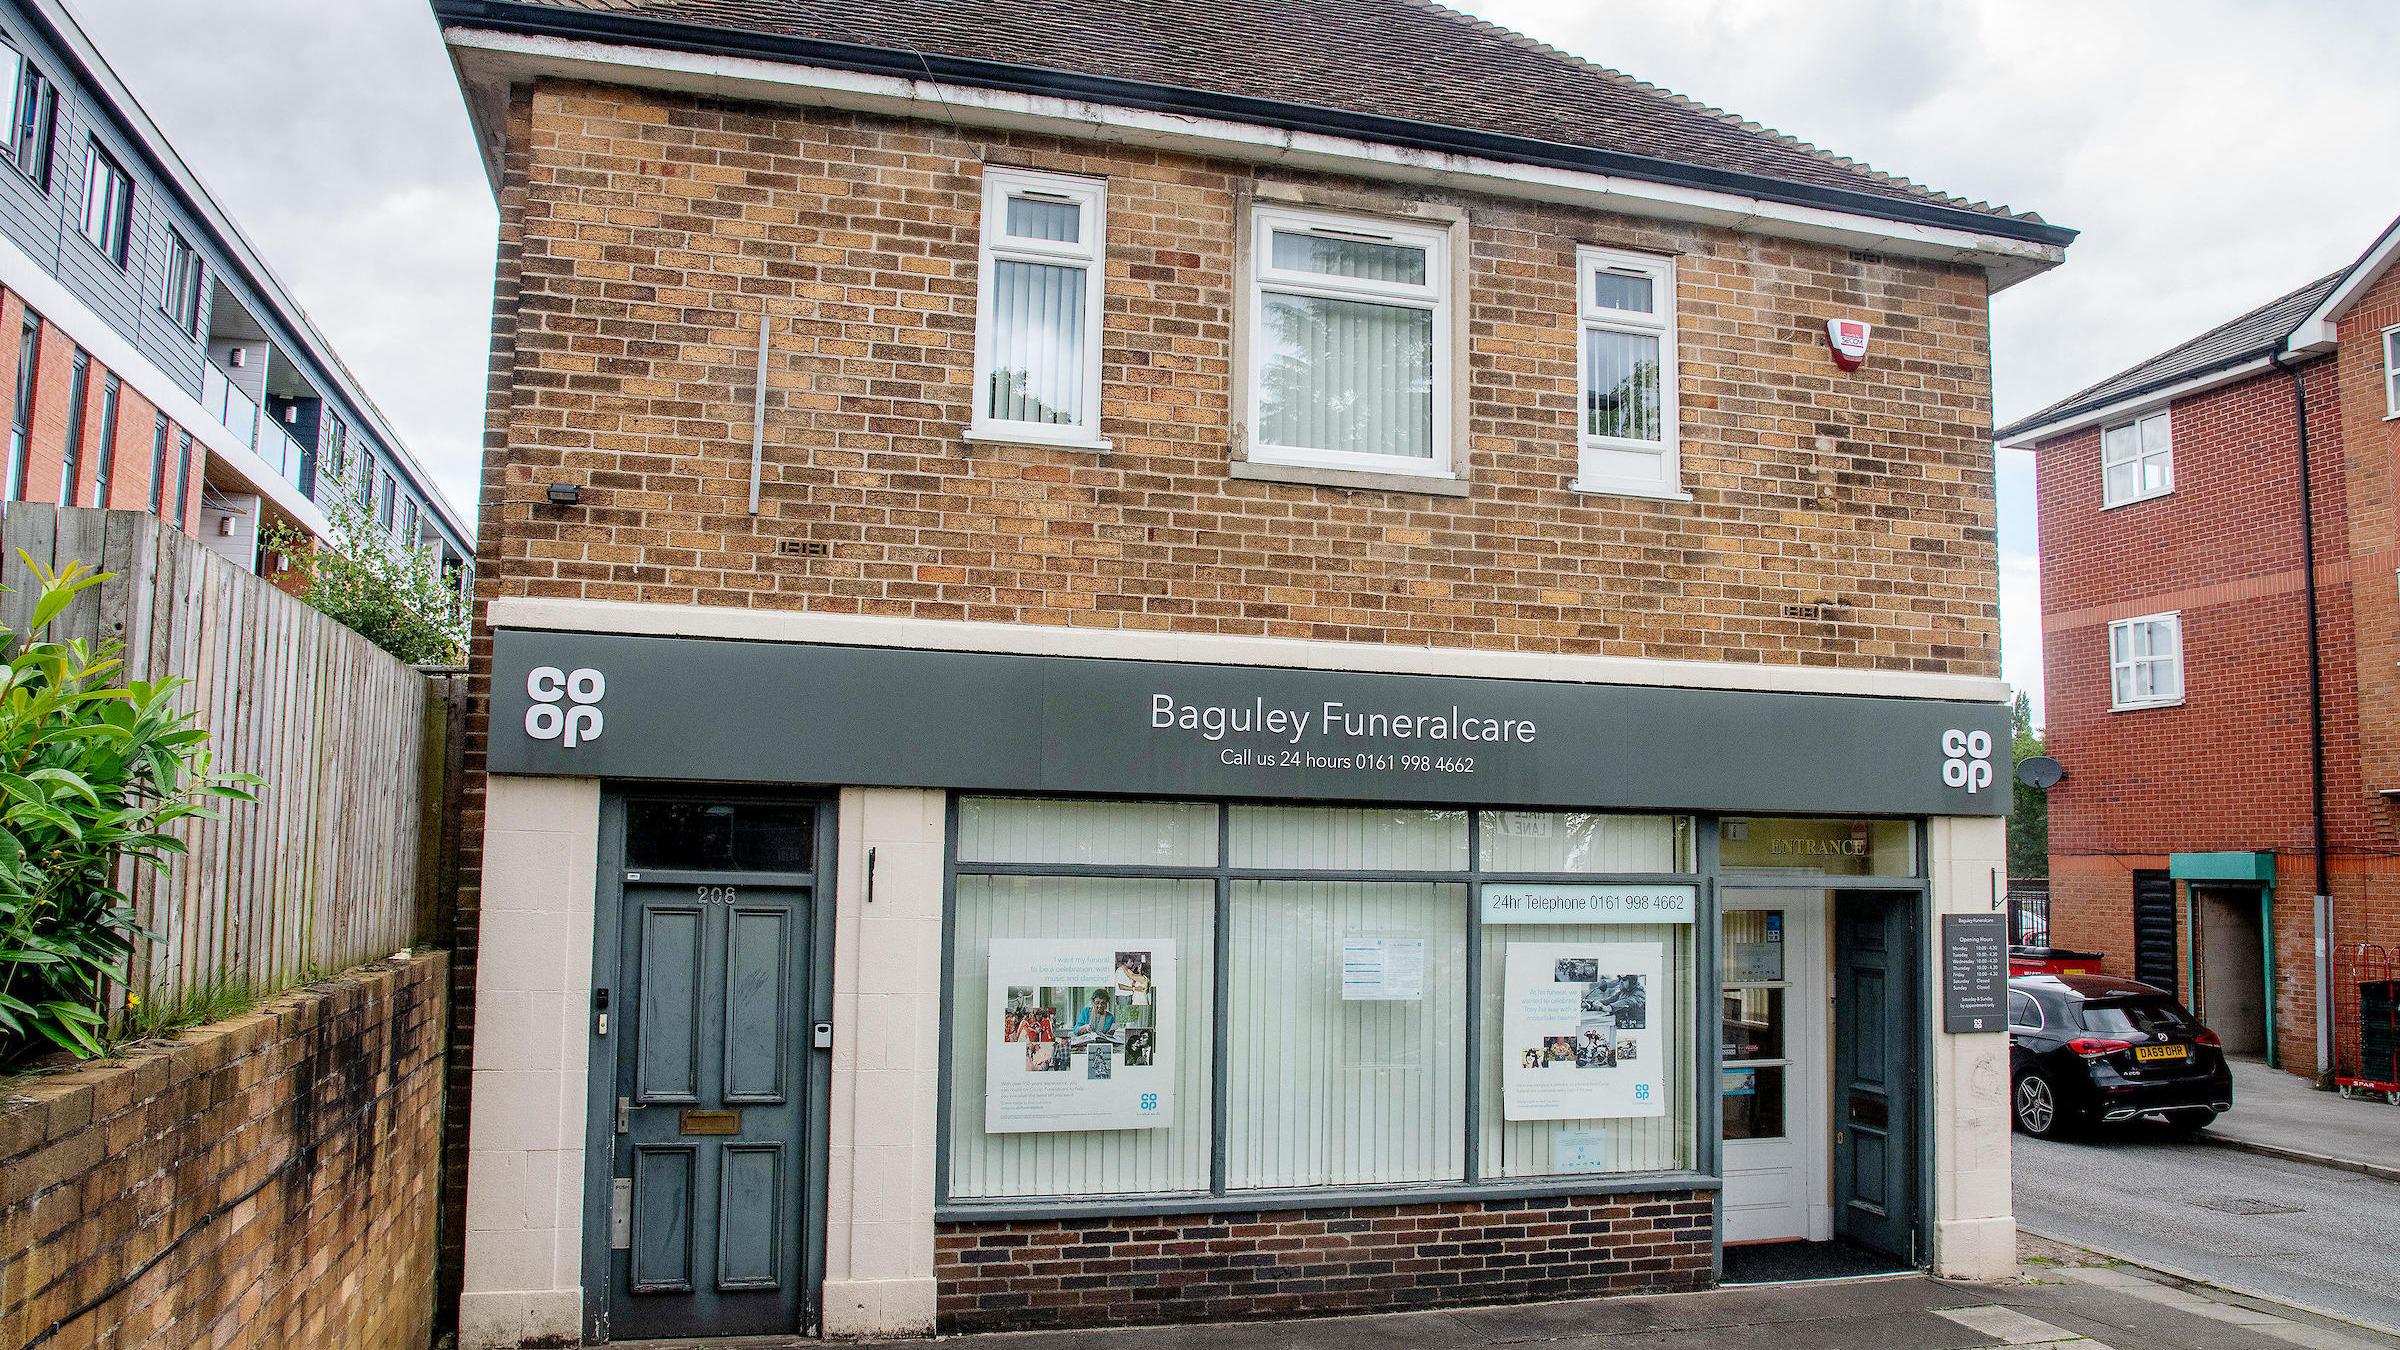 Images Baguley Funeralcare